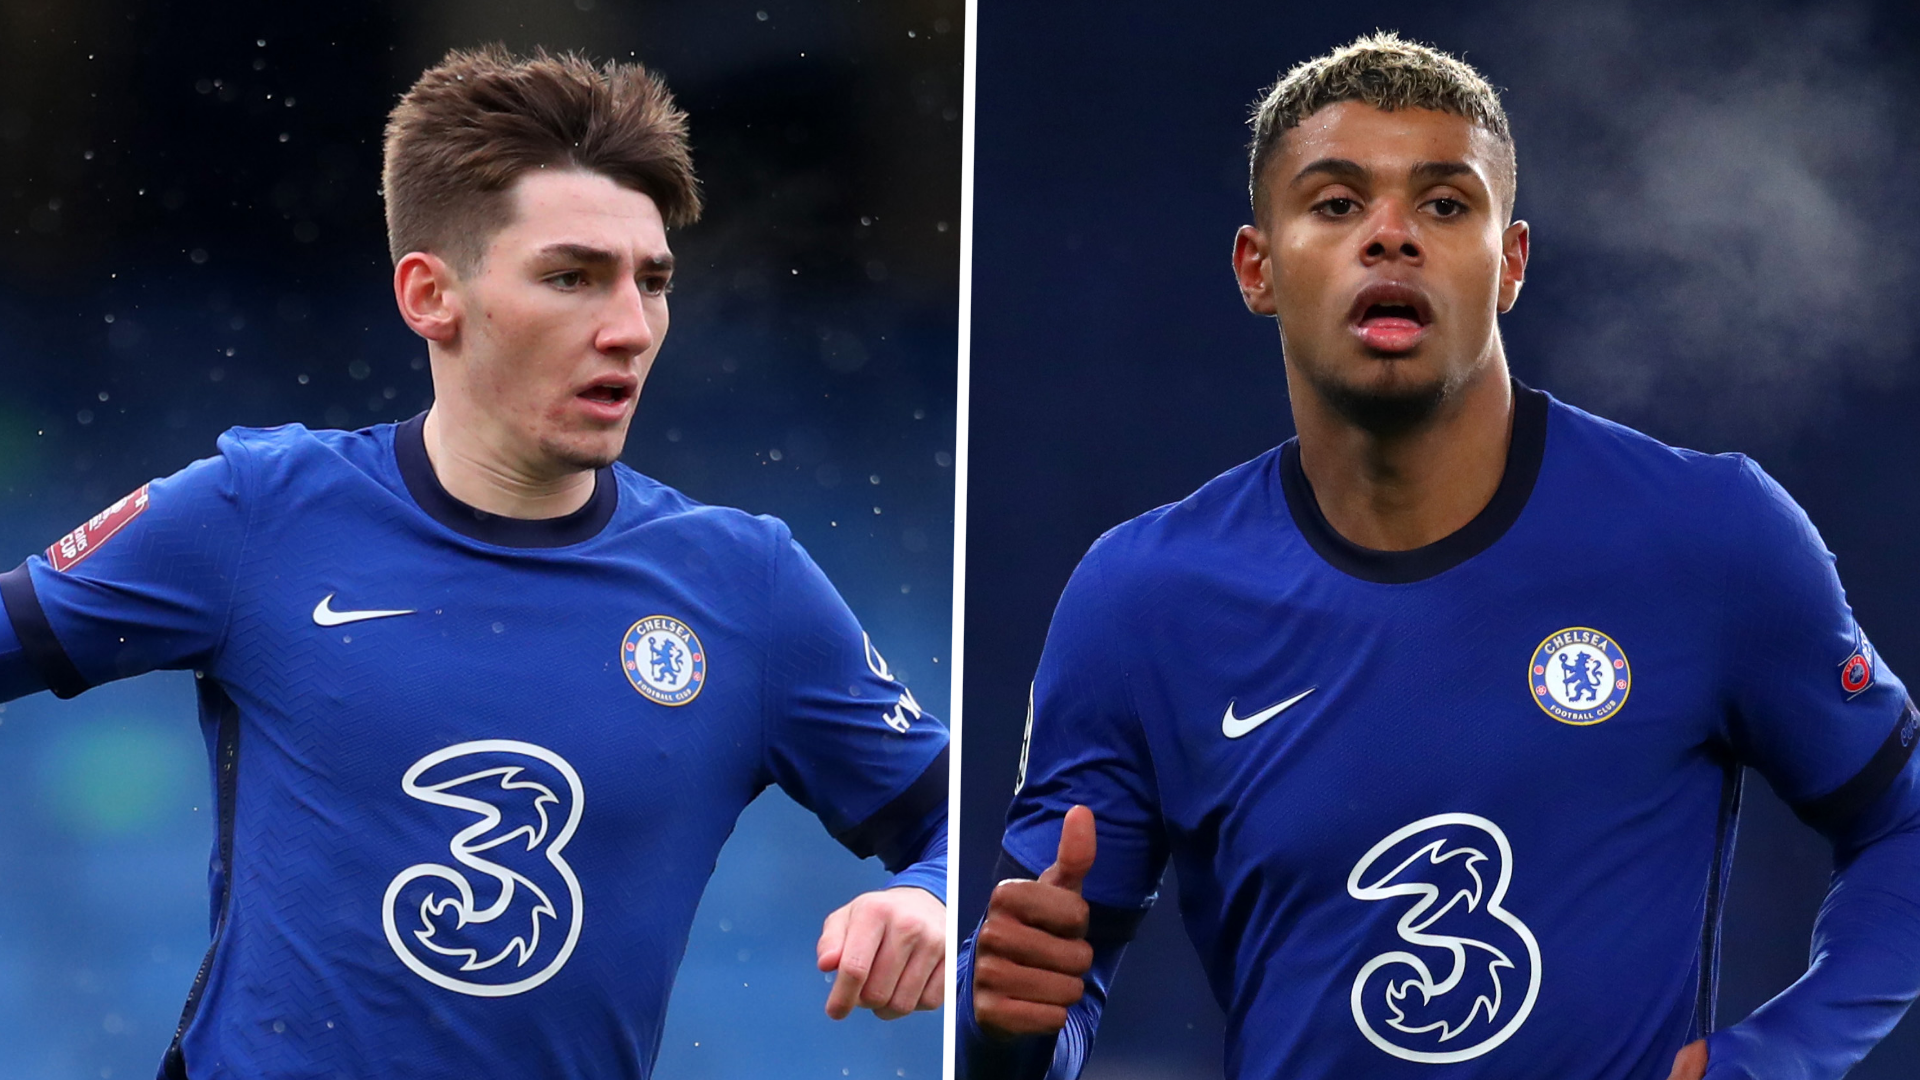 Tuchel explains why Chelsea kept wonderkids Gilmour and Anjorin instead of loaning them out